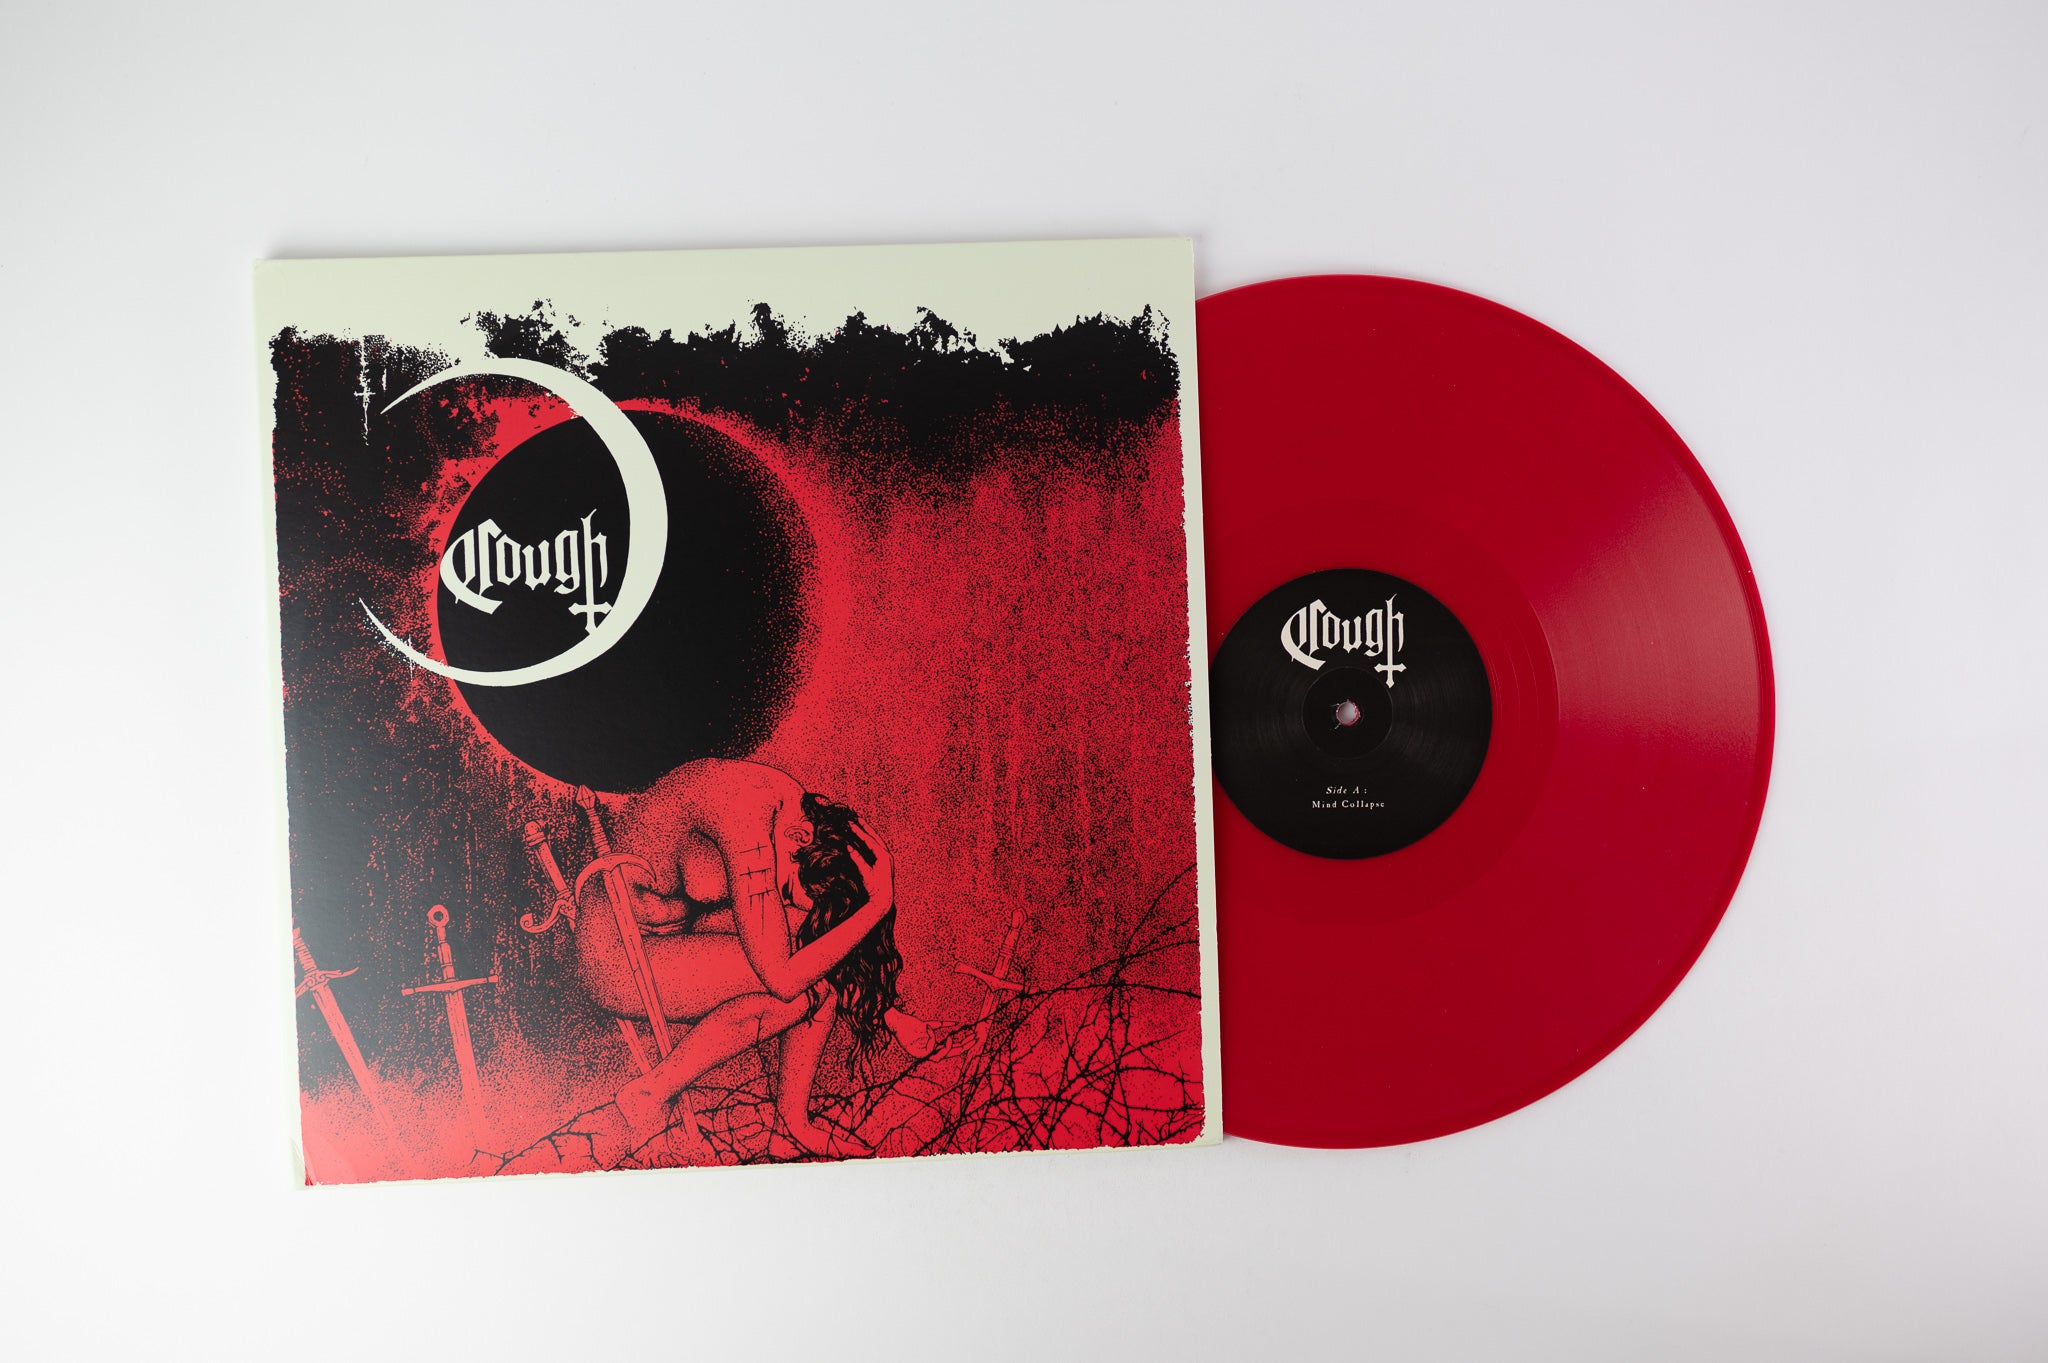 Cough - Ritual Abuse on Relapse Records Limited Red Opaque